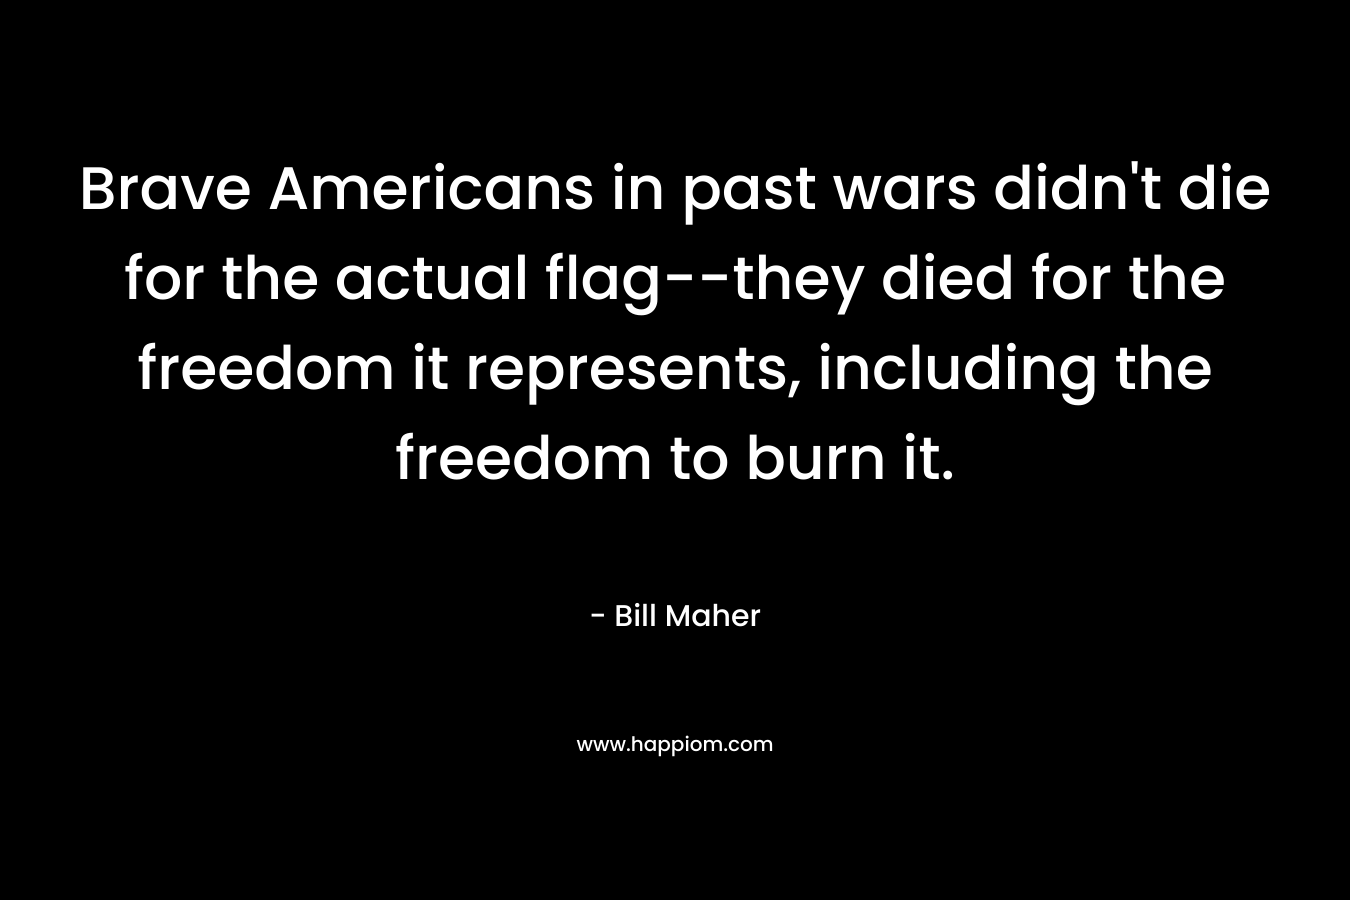 Brave Americans in past wars didn't die for the actual flag--they died for the freedom it represents, including the freedom to burn it.